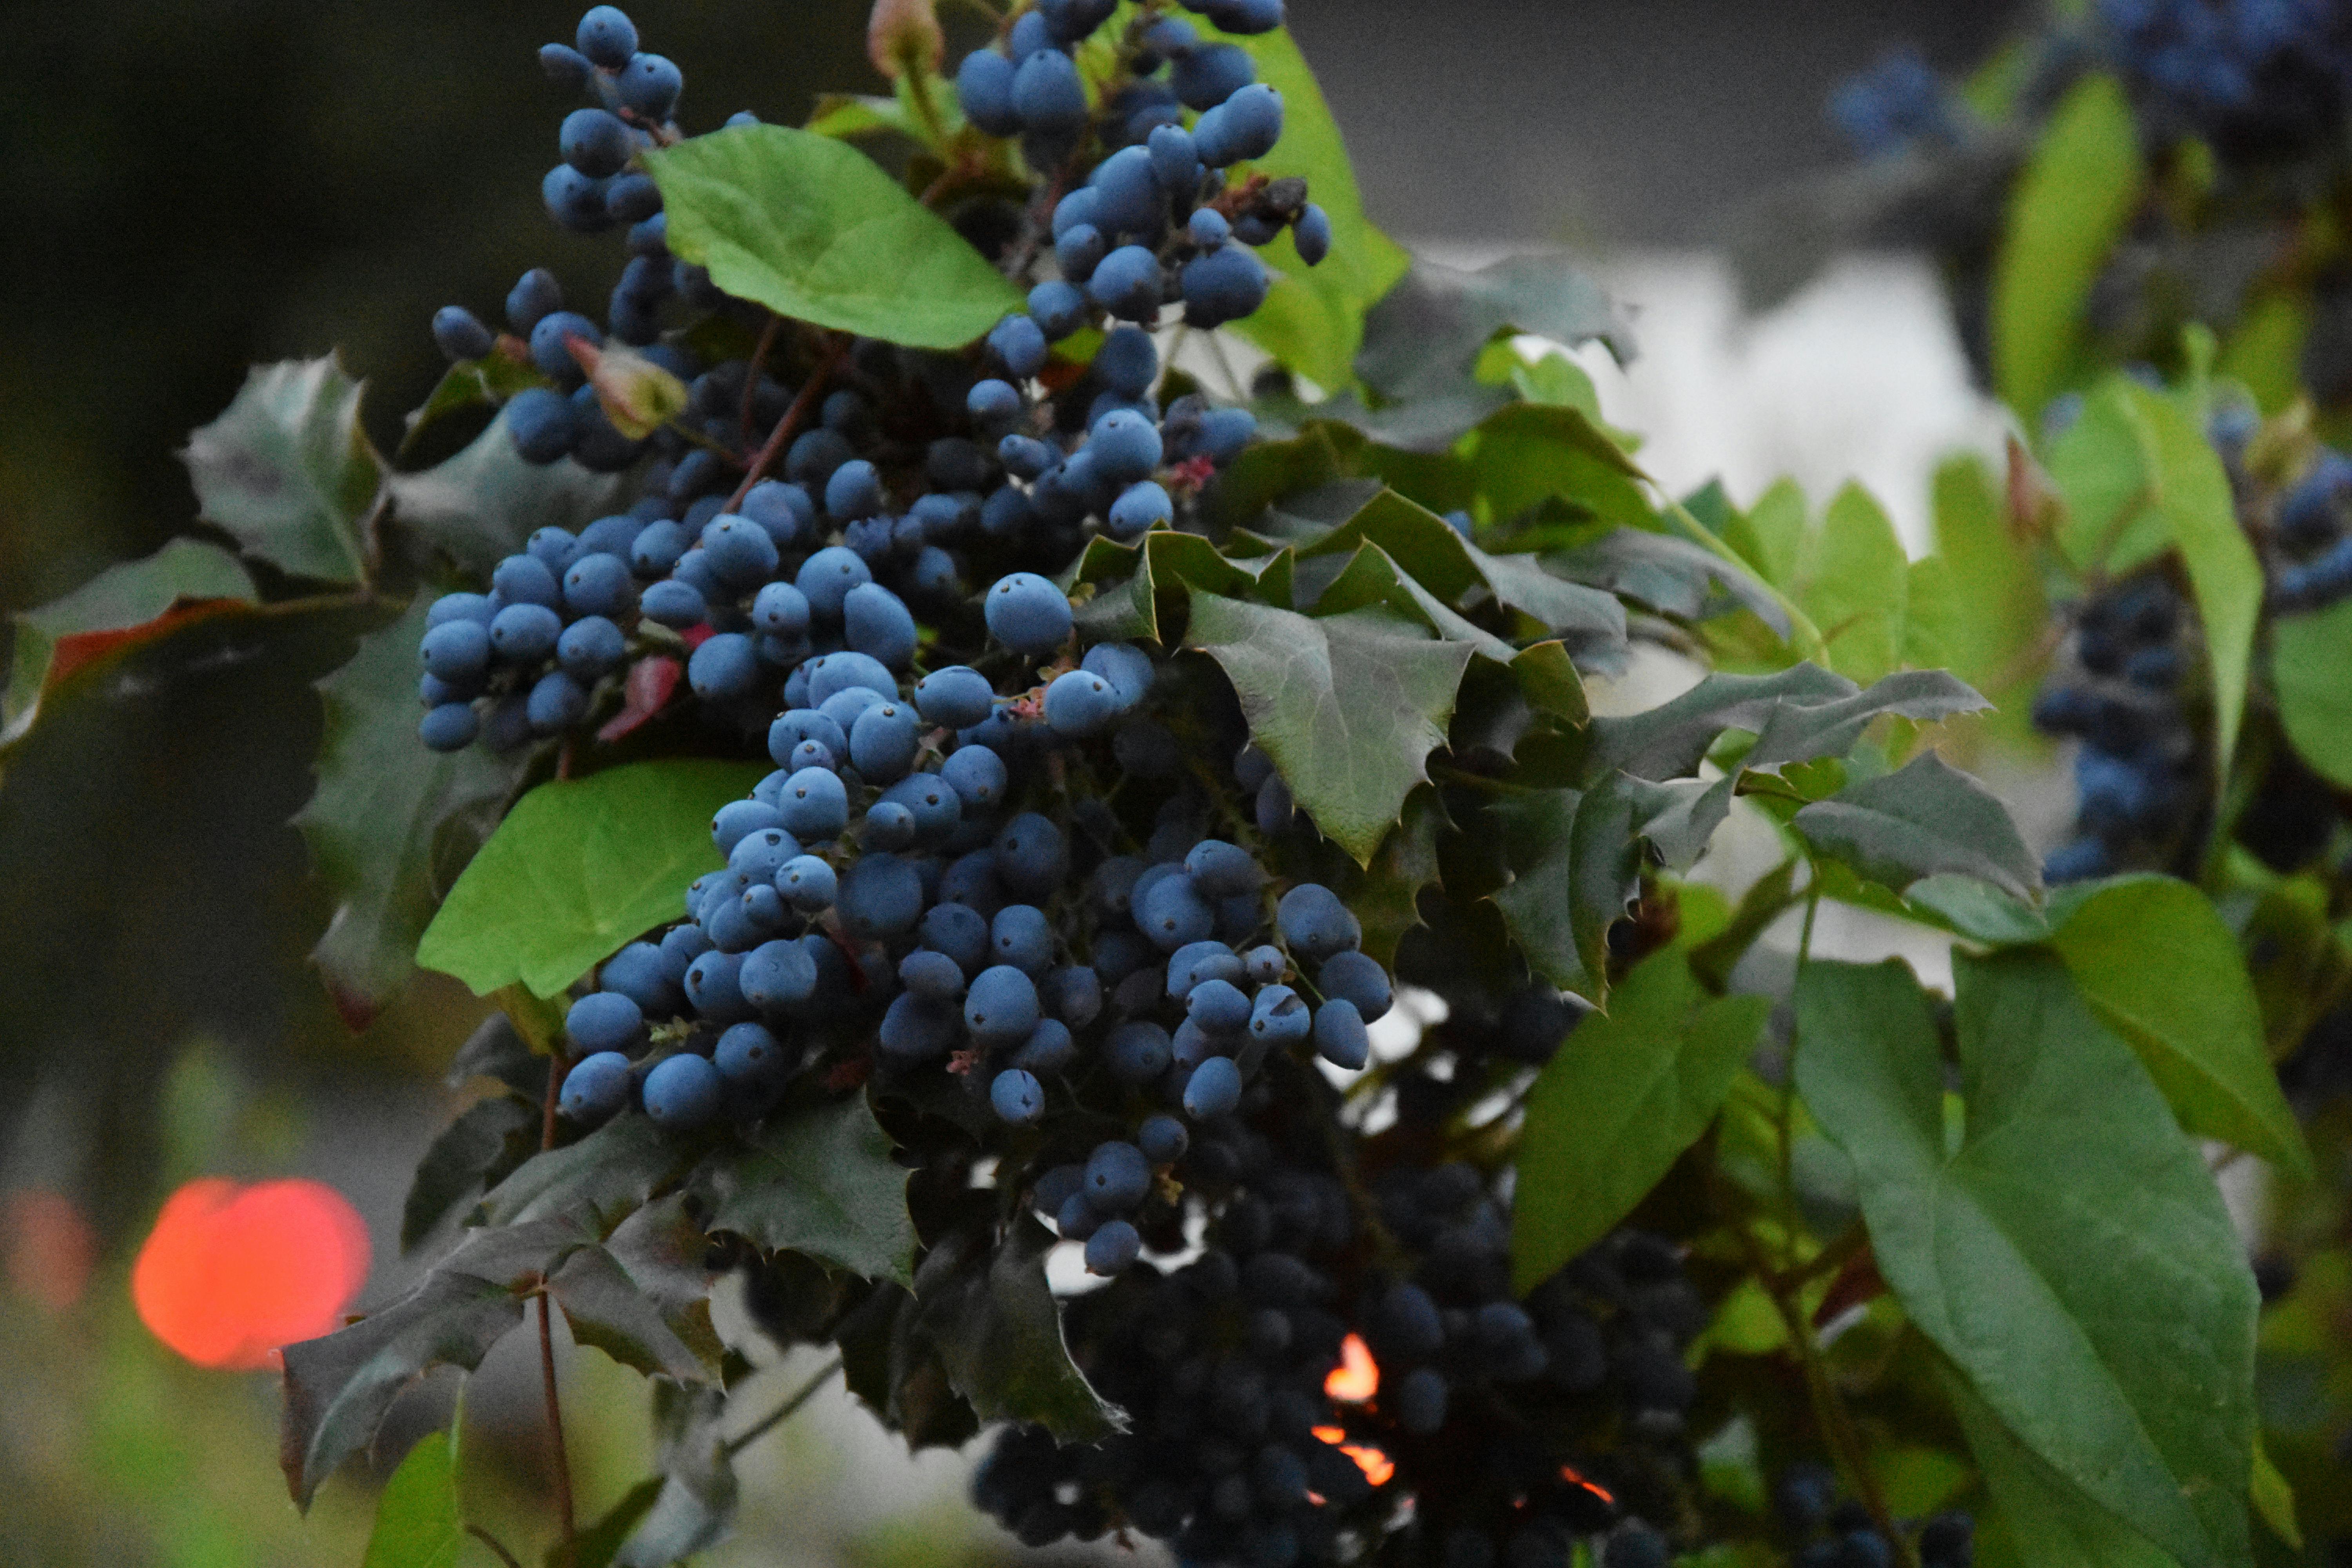 Fruits you can farm and grow in a greenhouse: Blueberries